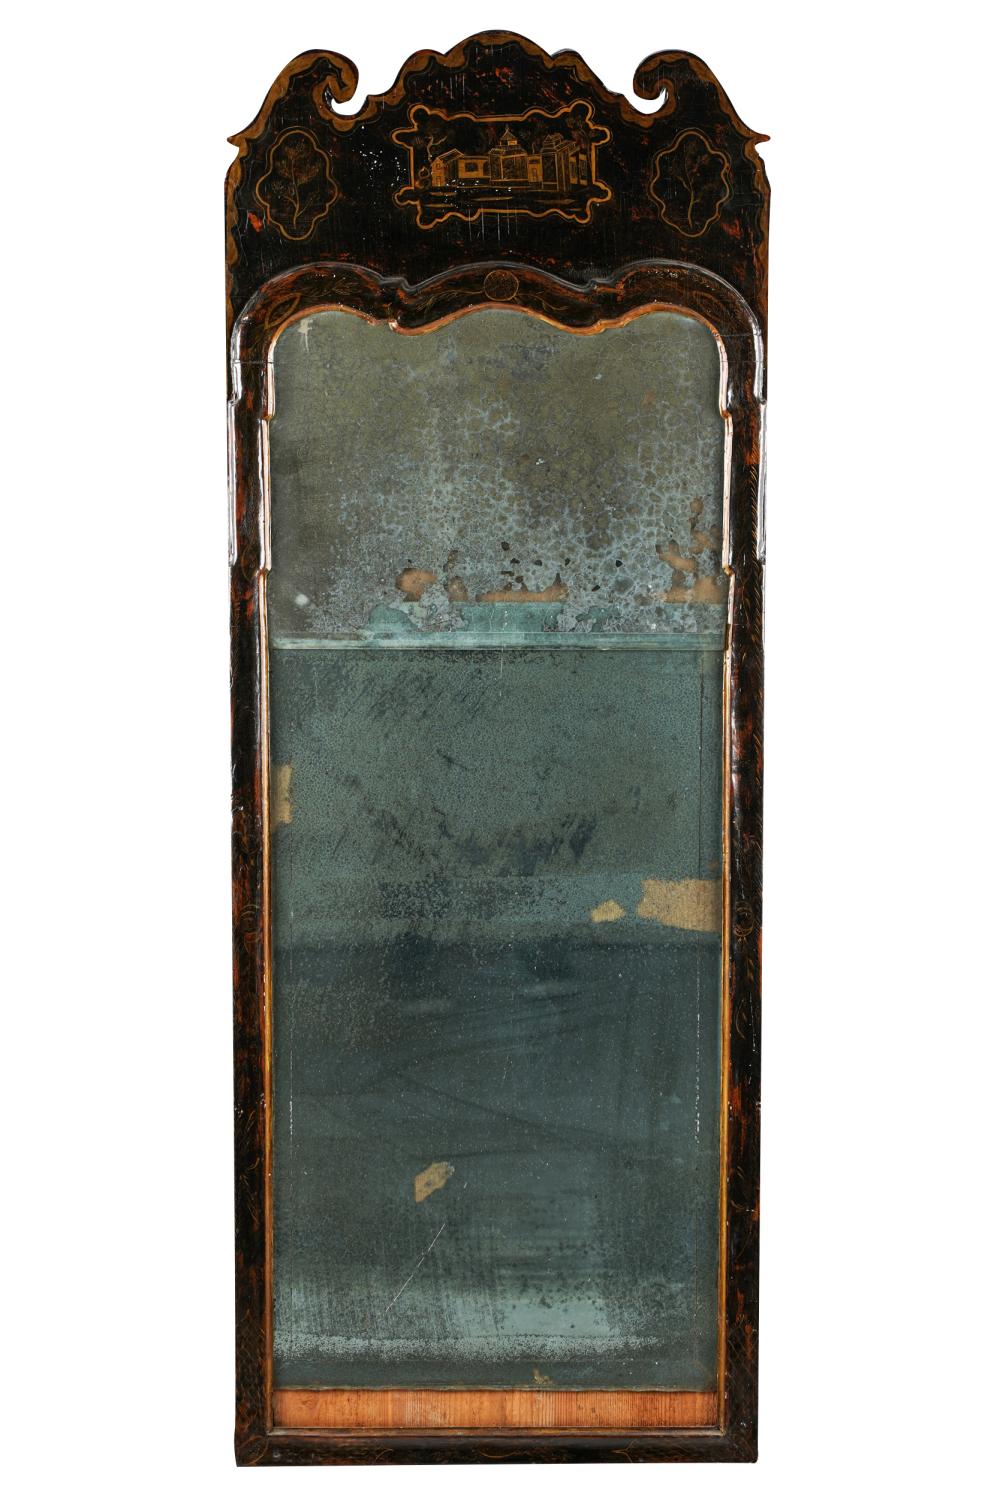 ENGLISH JAPANNED WALL MIRRORwith